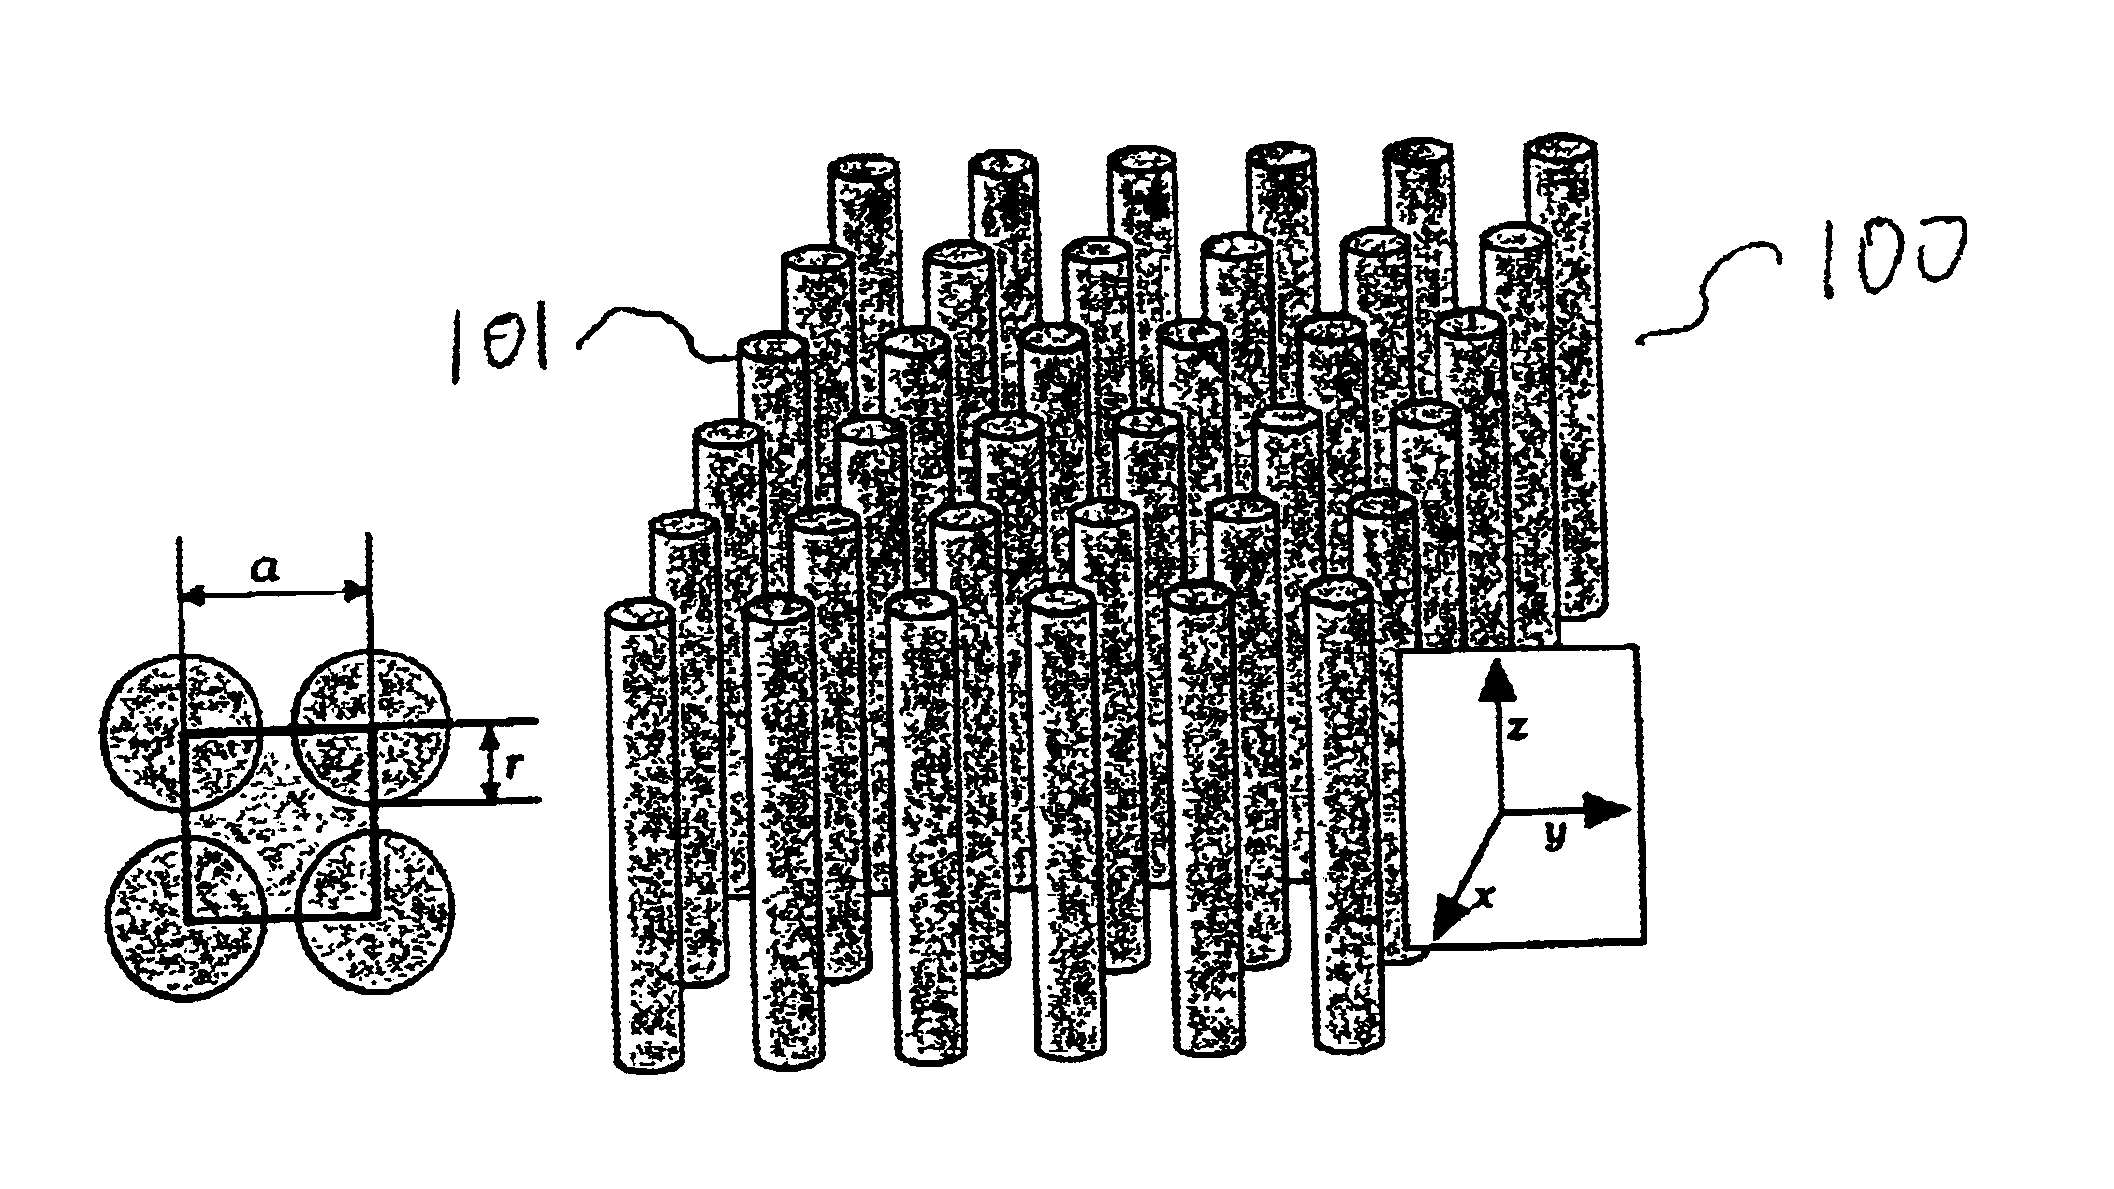 Photonic crystals and devices having tunability and switchability